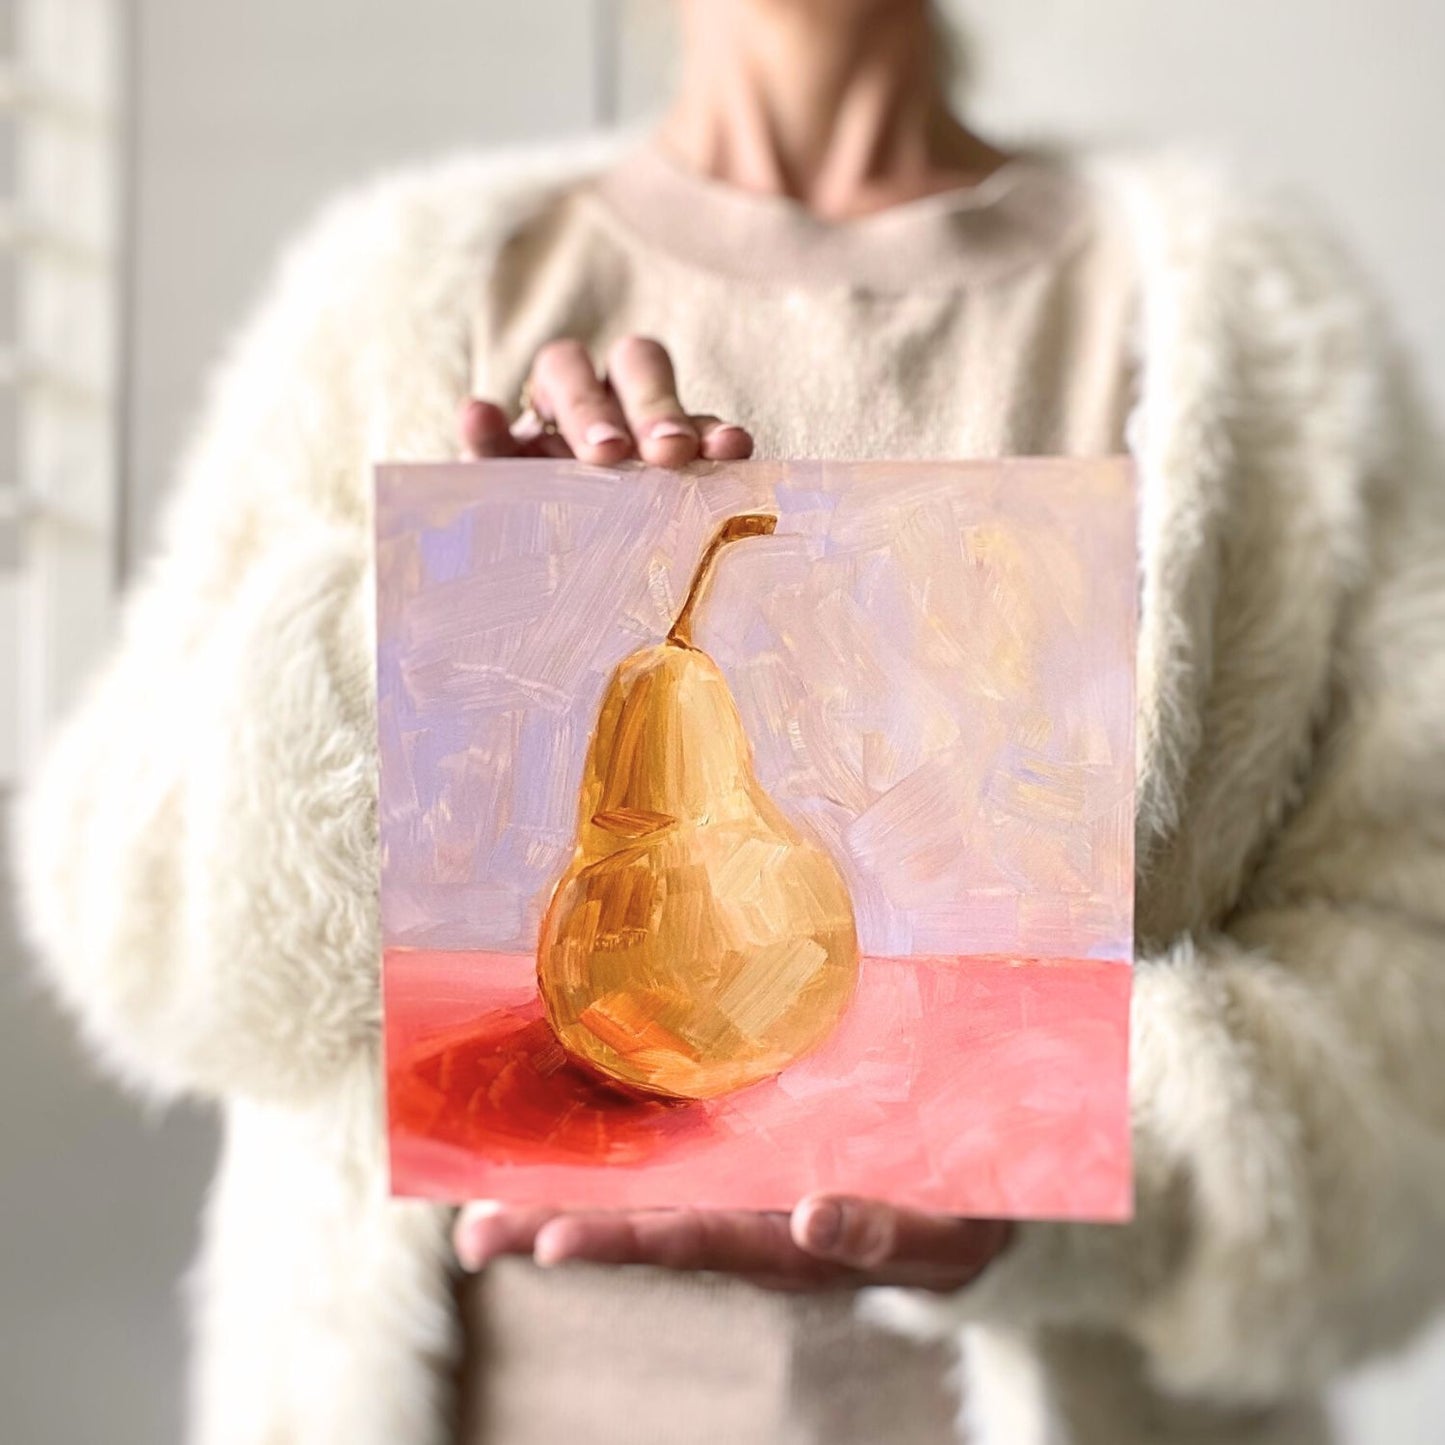 photo of a person holding an original oil painting of a yellow / beige pear on a textured pink surface and lilac background